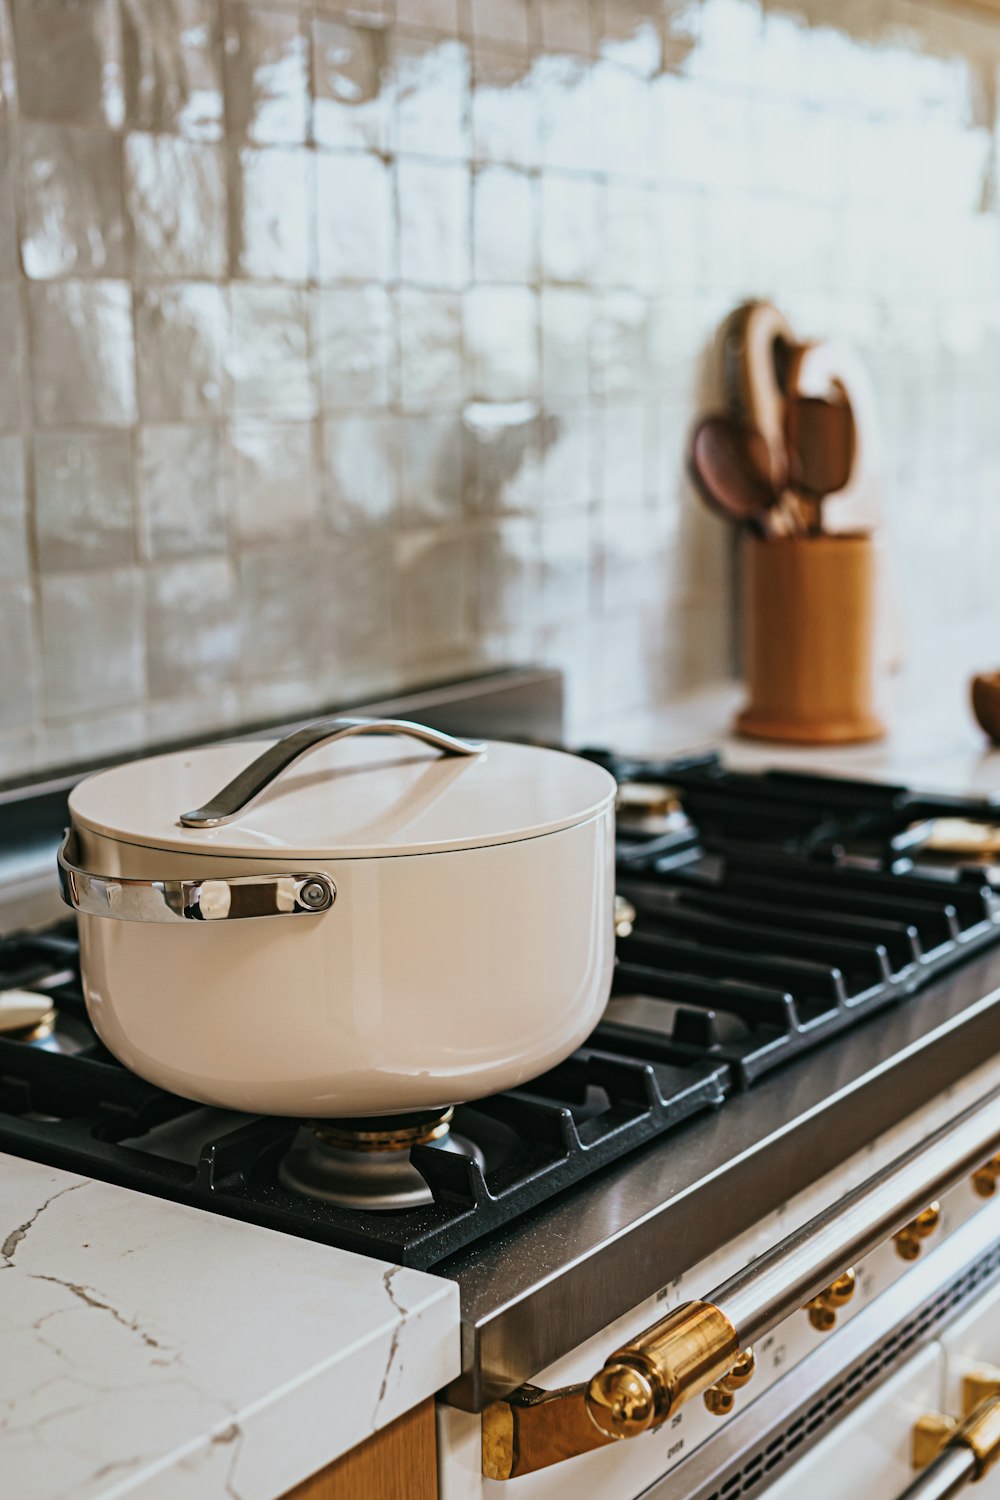 white and brown ceramic cooking pot on stove